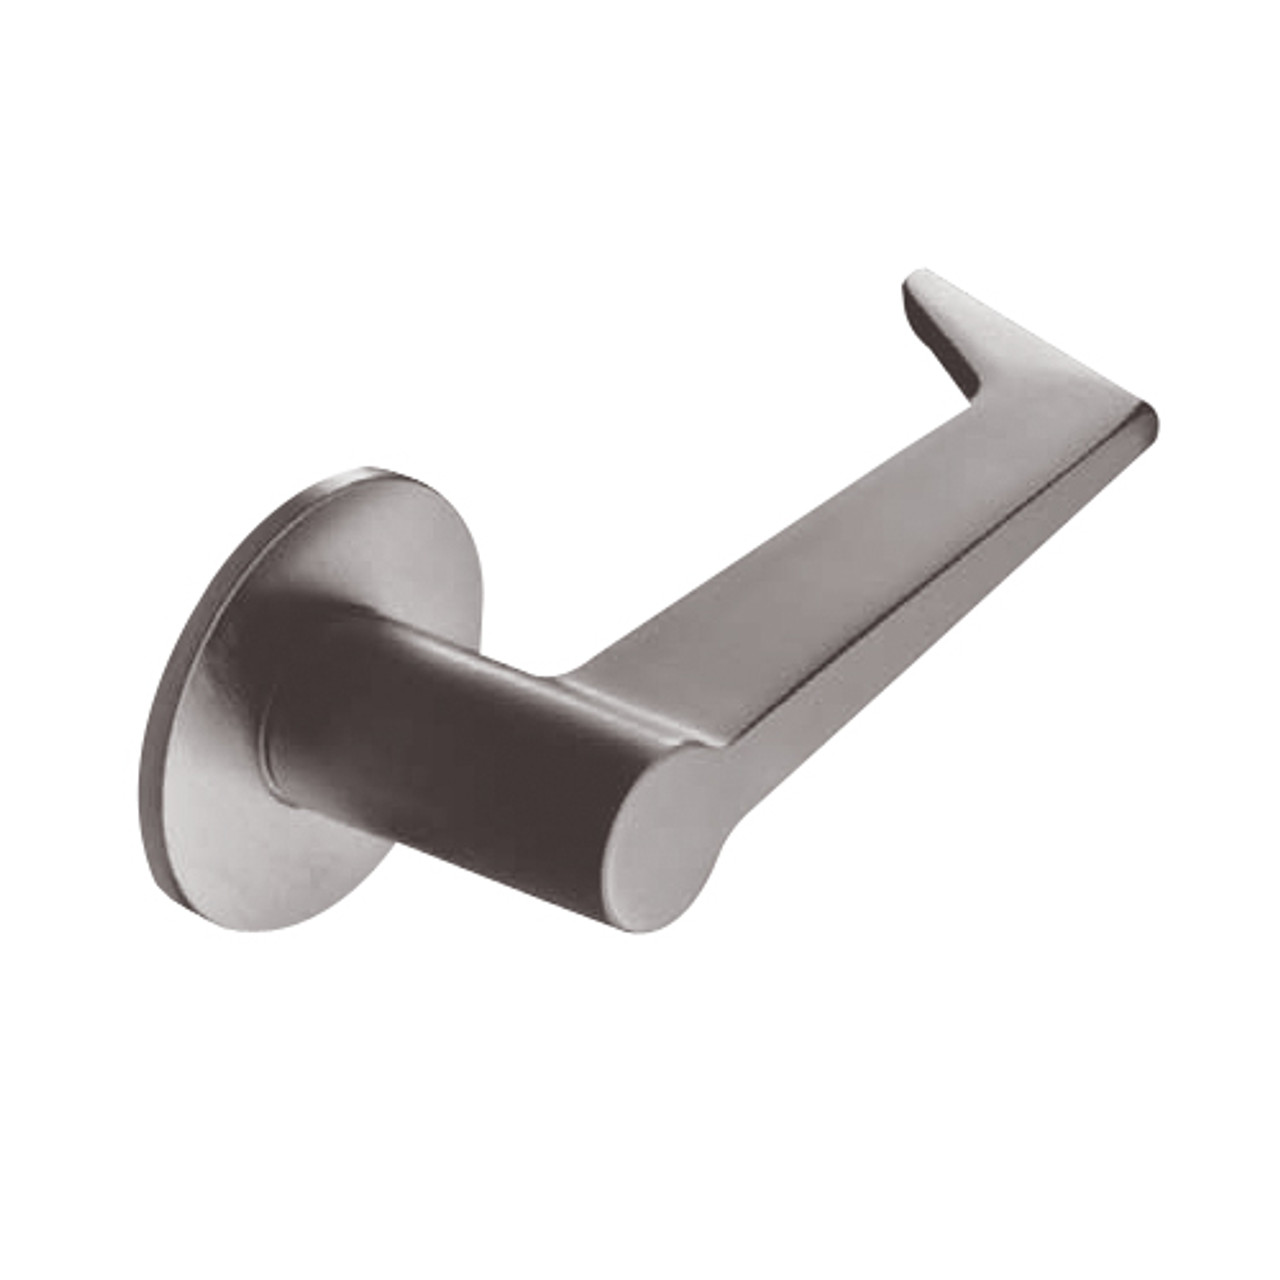 ML2051-ESB-630-M31 Corbin Russwin ML2000 Series Mortise Office Trim Pack with Essex Lever in Satin Stainless